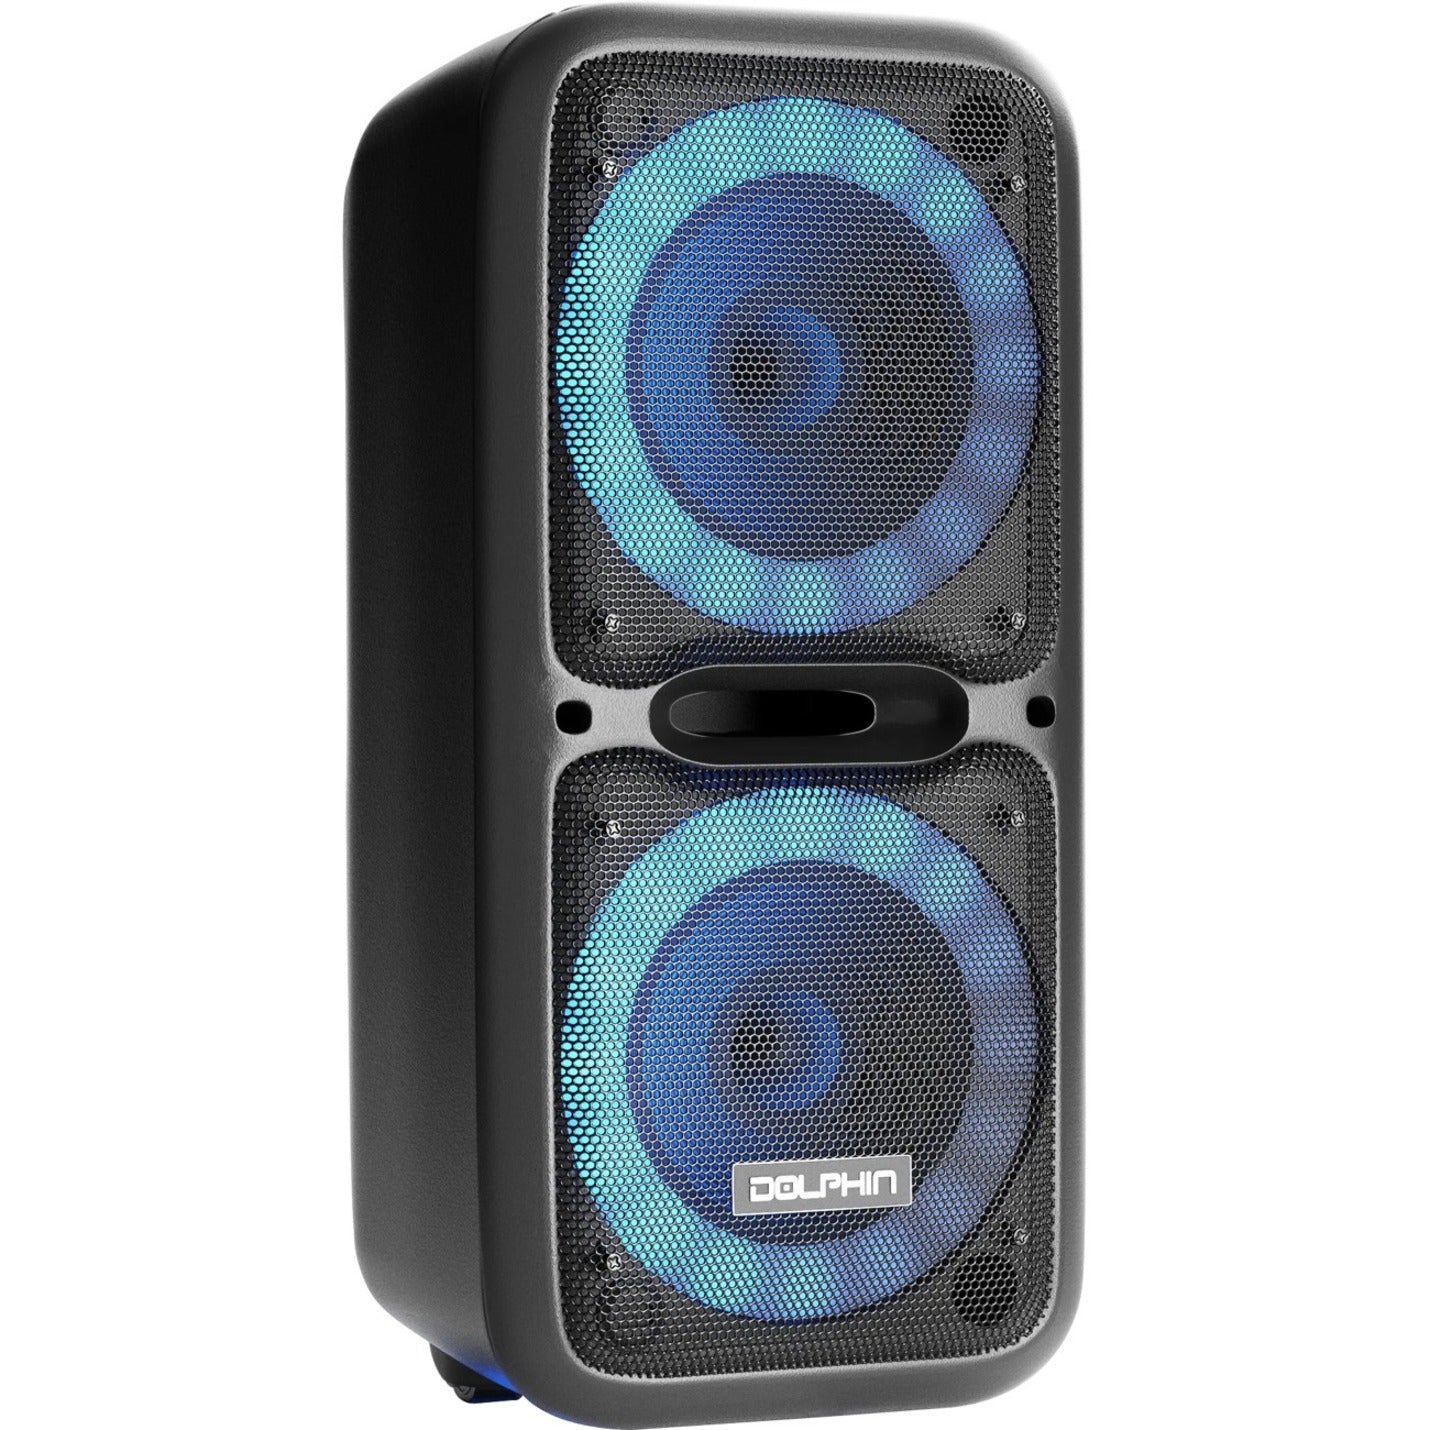 Dolphin Audio SP-2120RBT 12-Inch Dual Rechargeable Party Speaker [Discontinued]